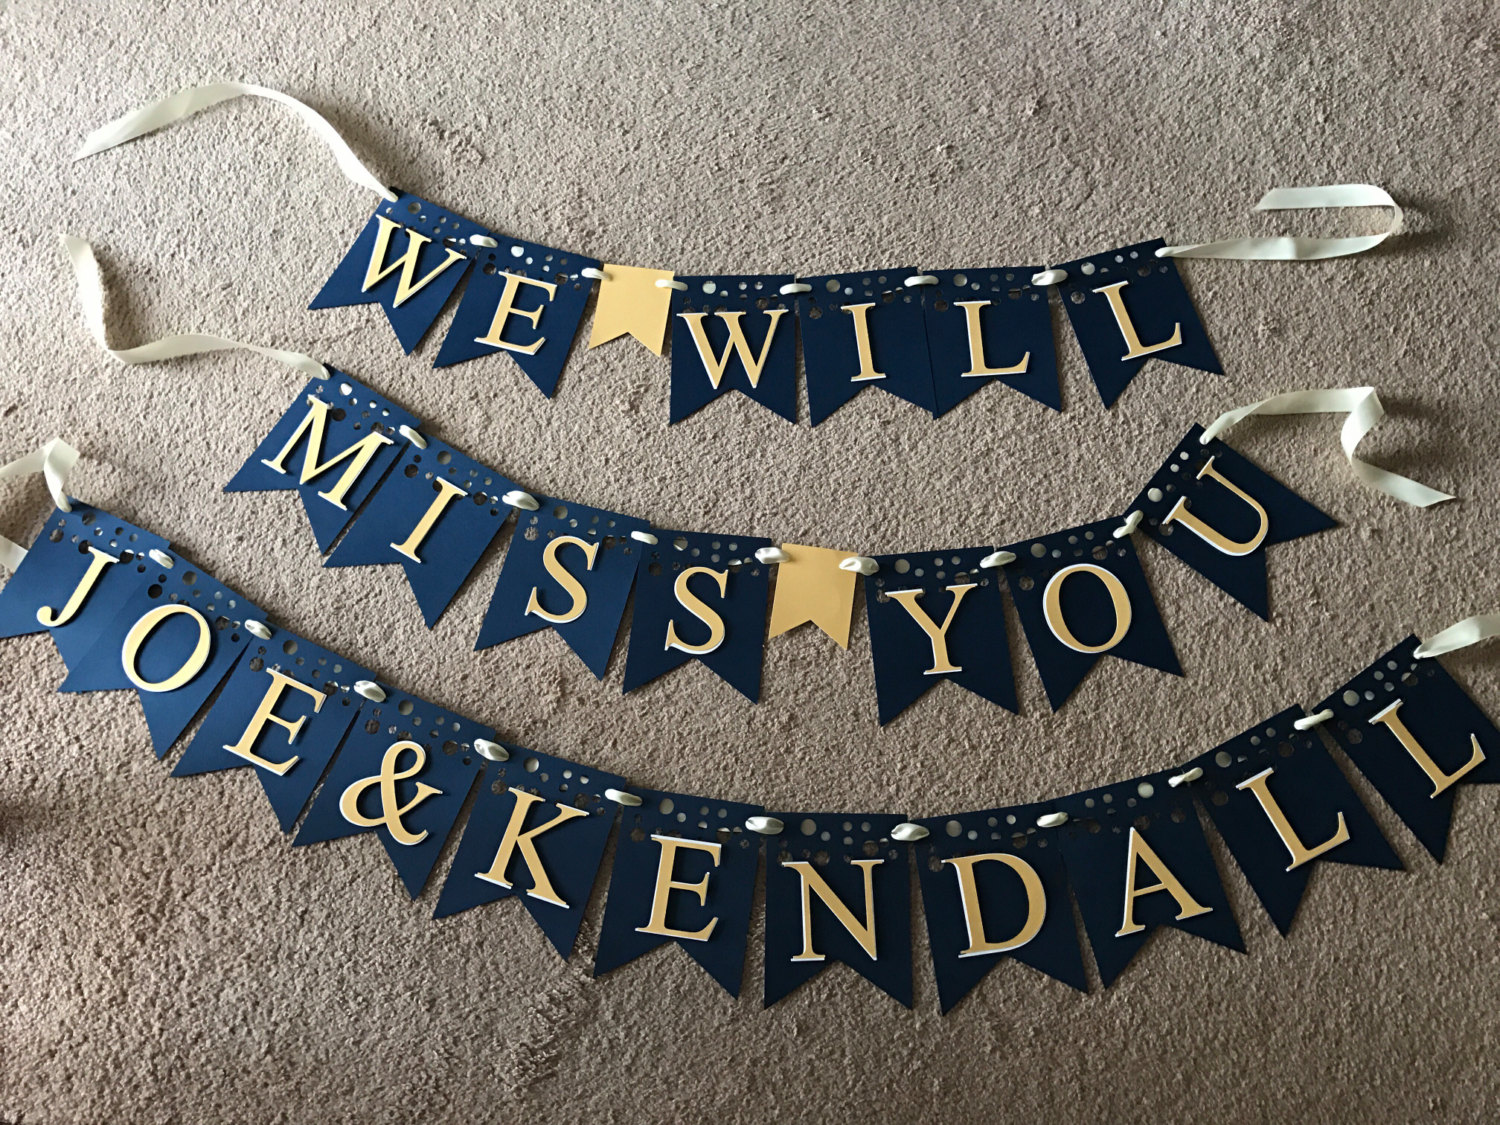 We will miss you banner name included